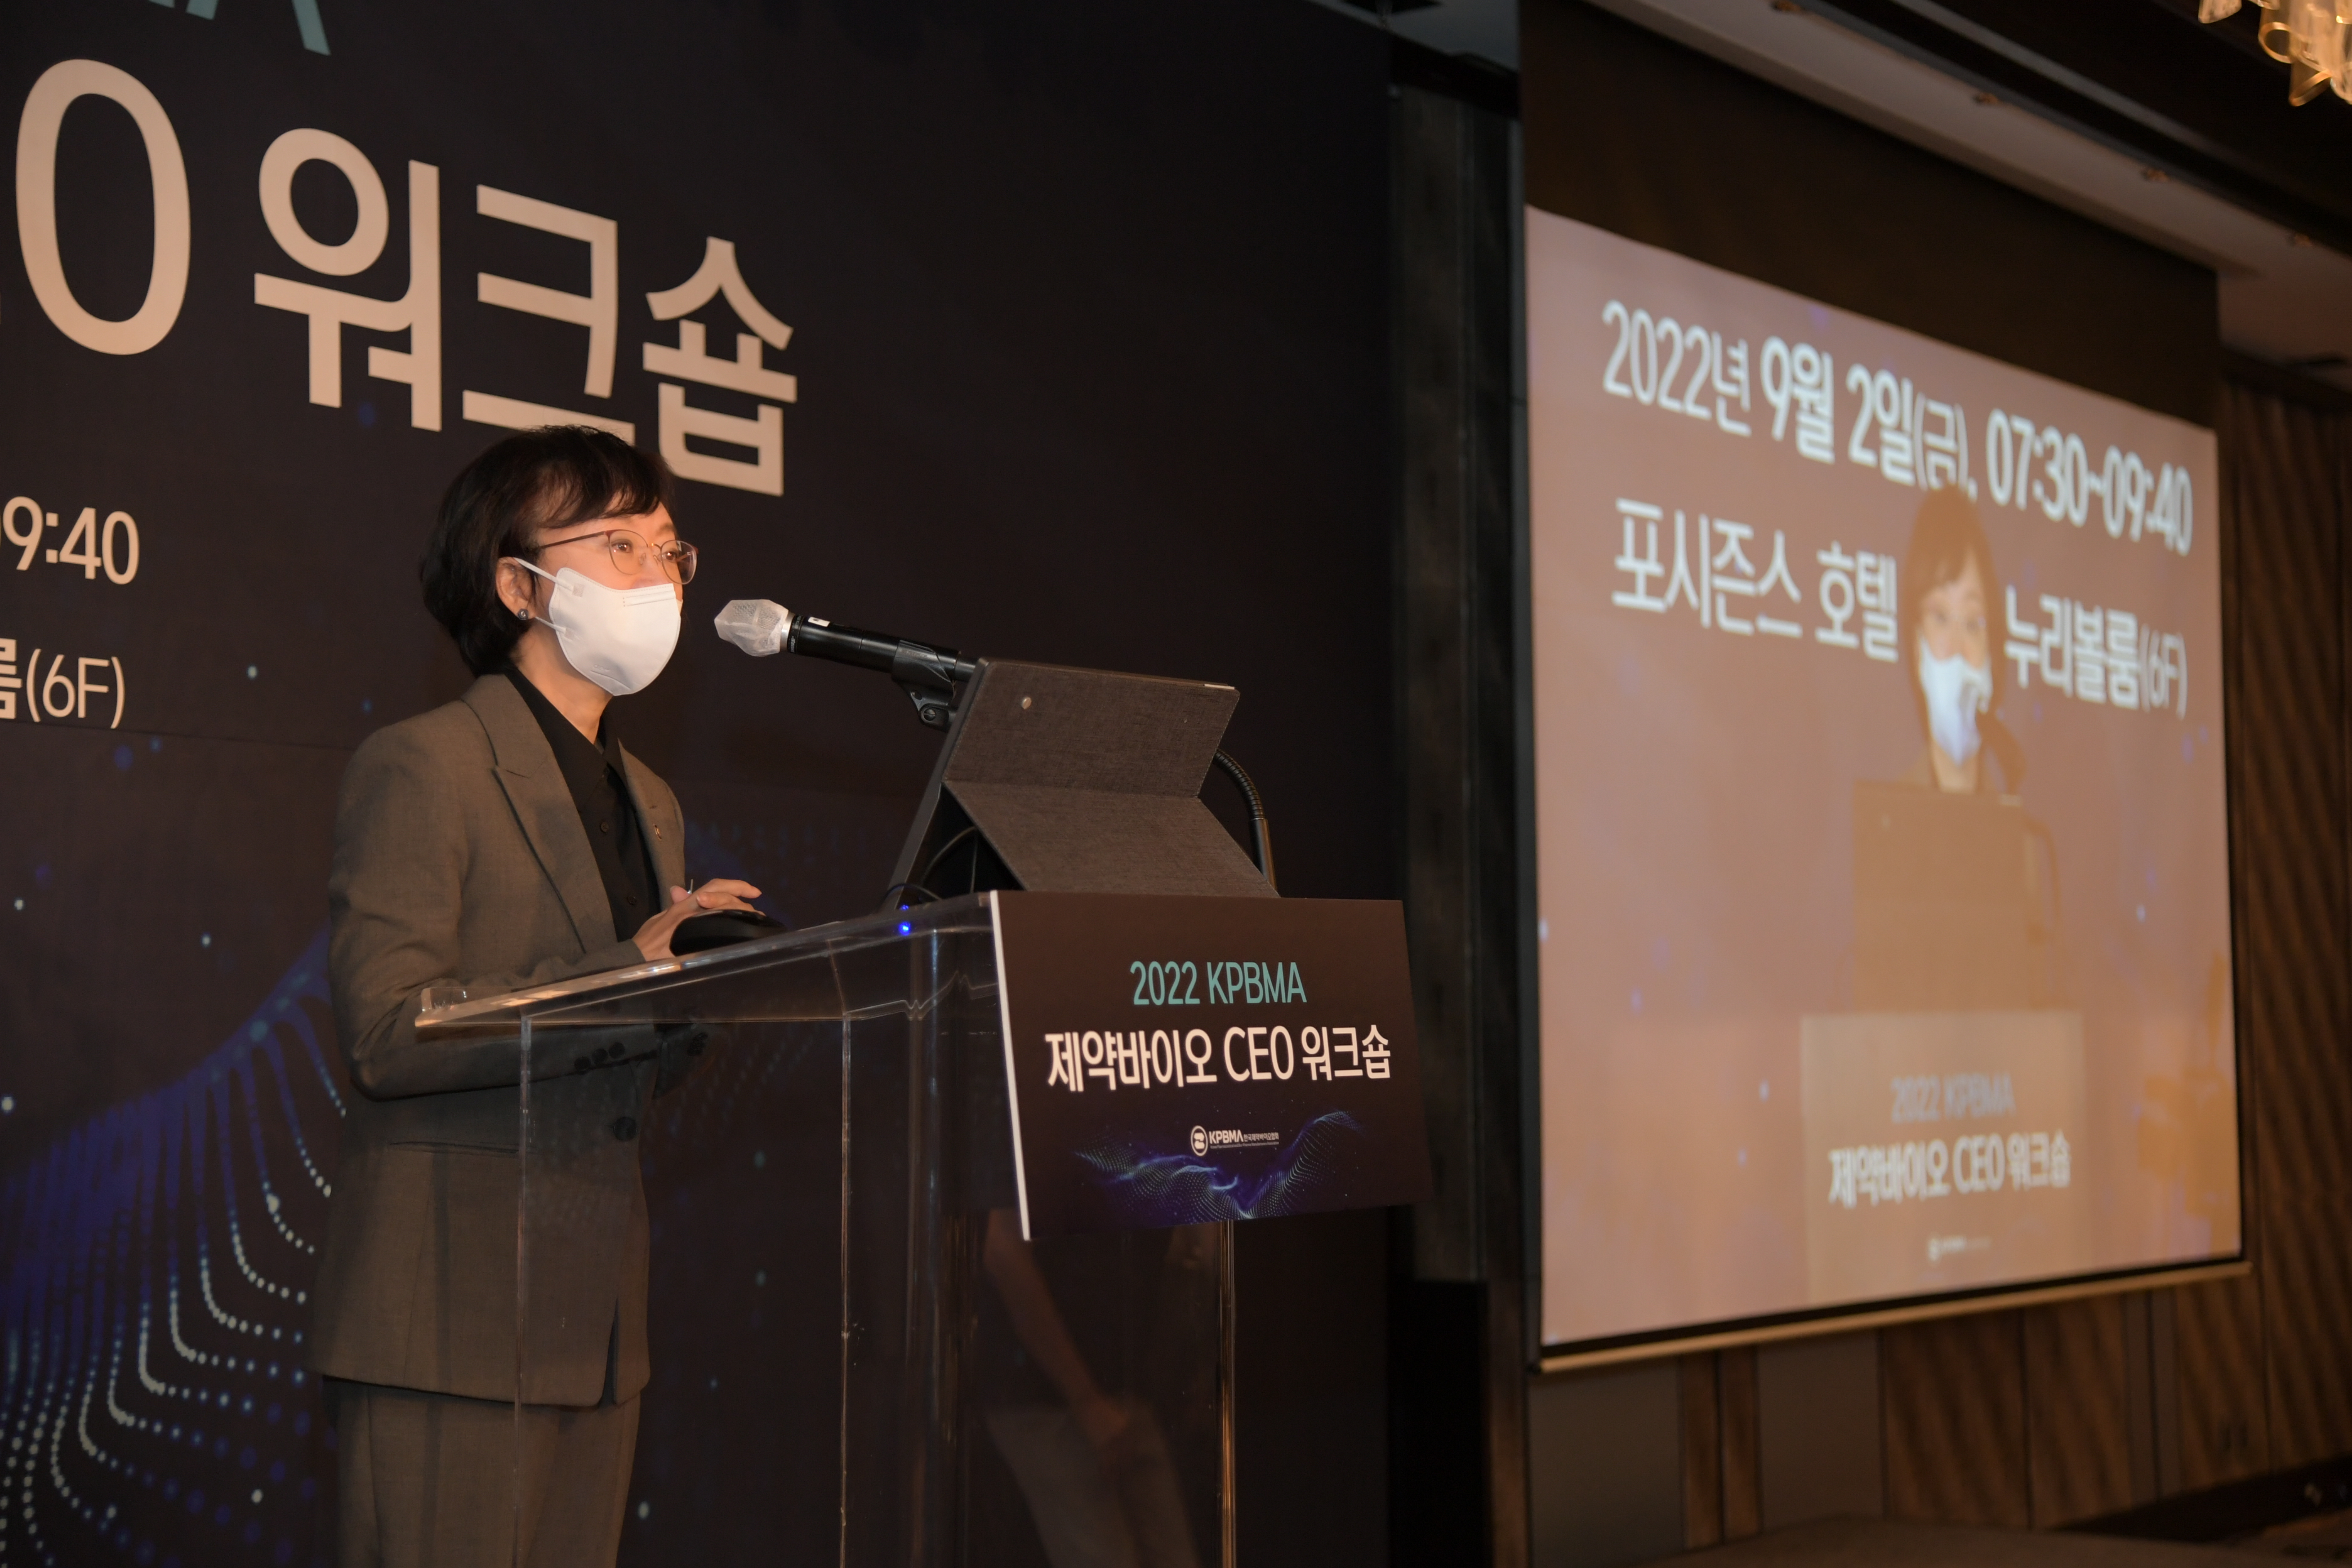 Photo News1 - [Sept. 2, 2022] Minister Attends 2022 KPBMA Pharmaceutical and Bio-Pharma CEO Workshop